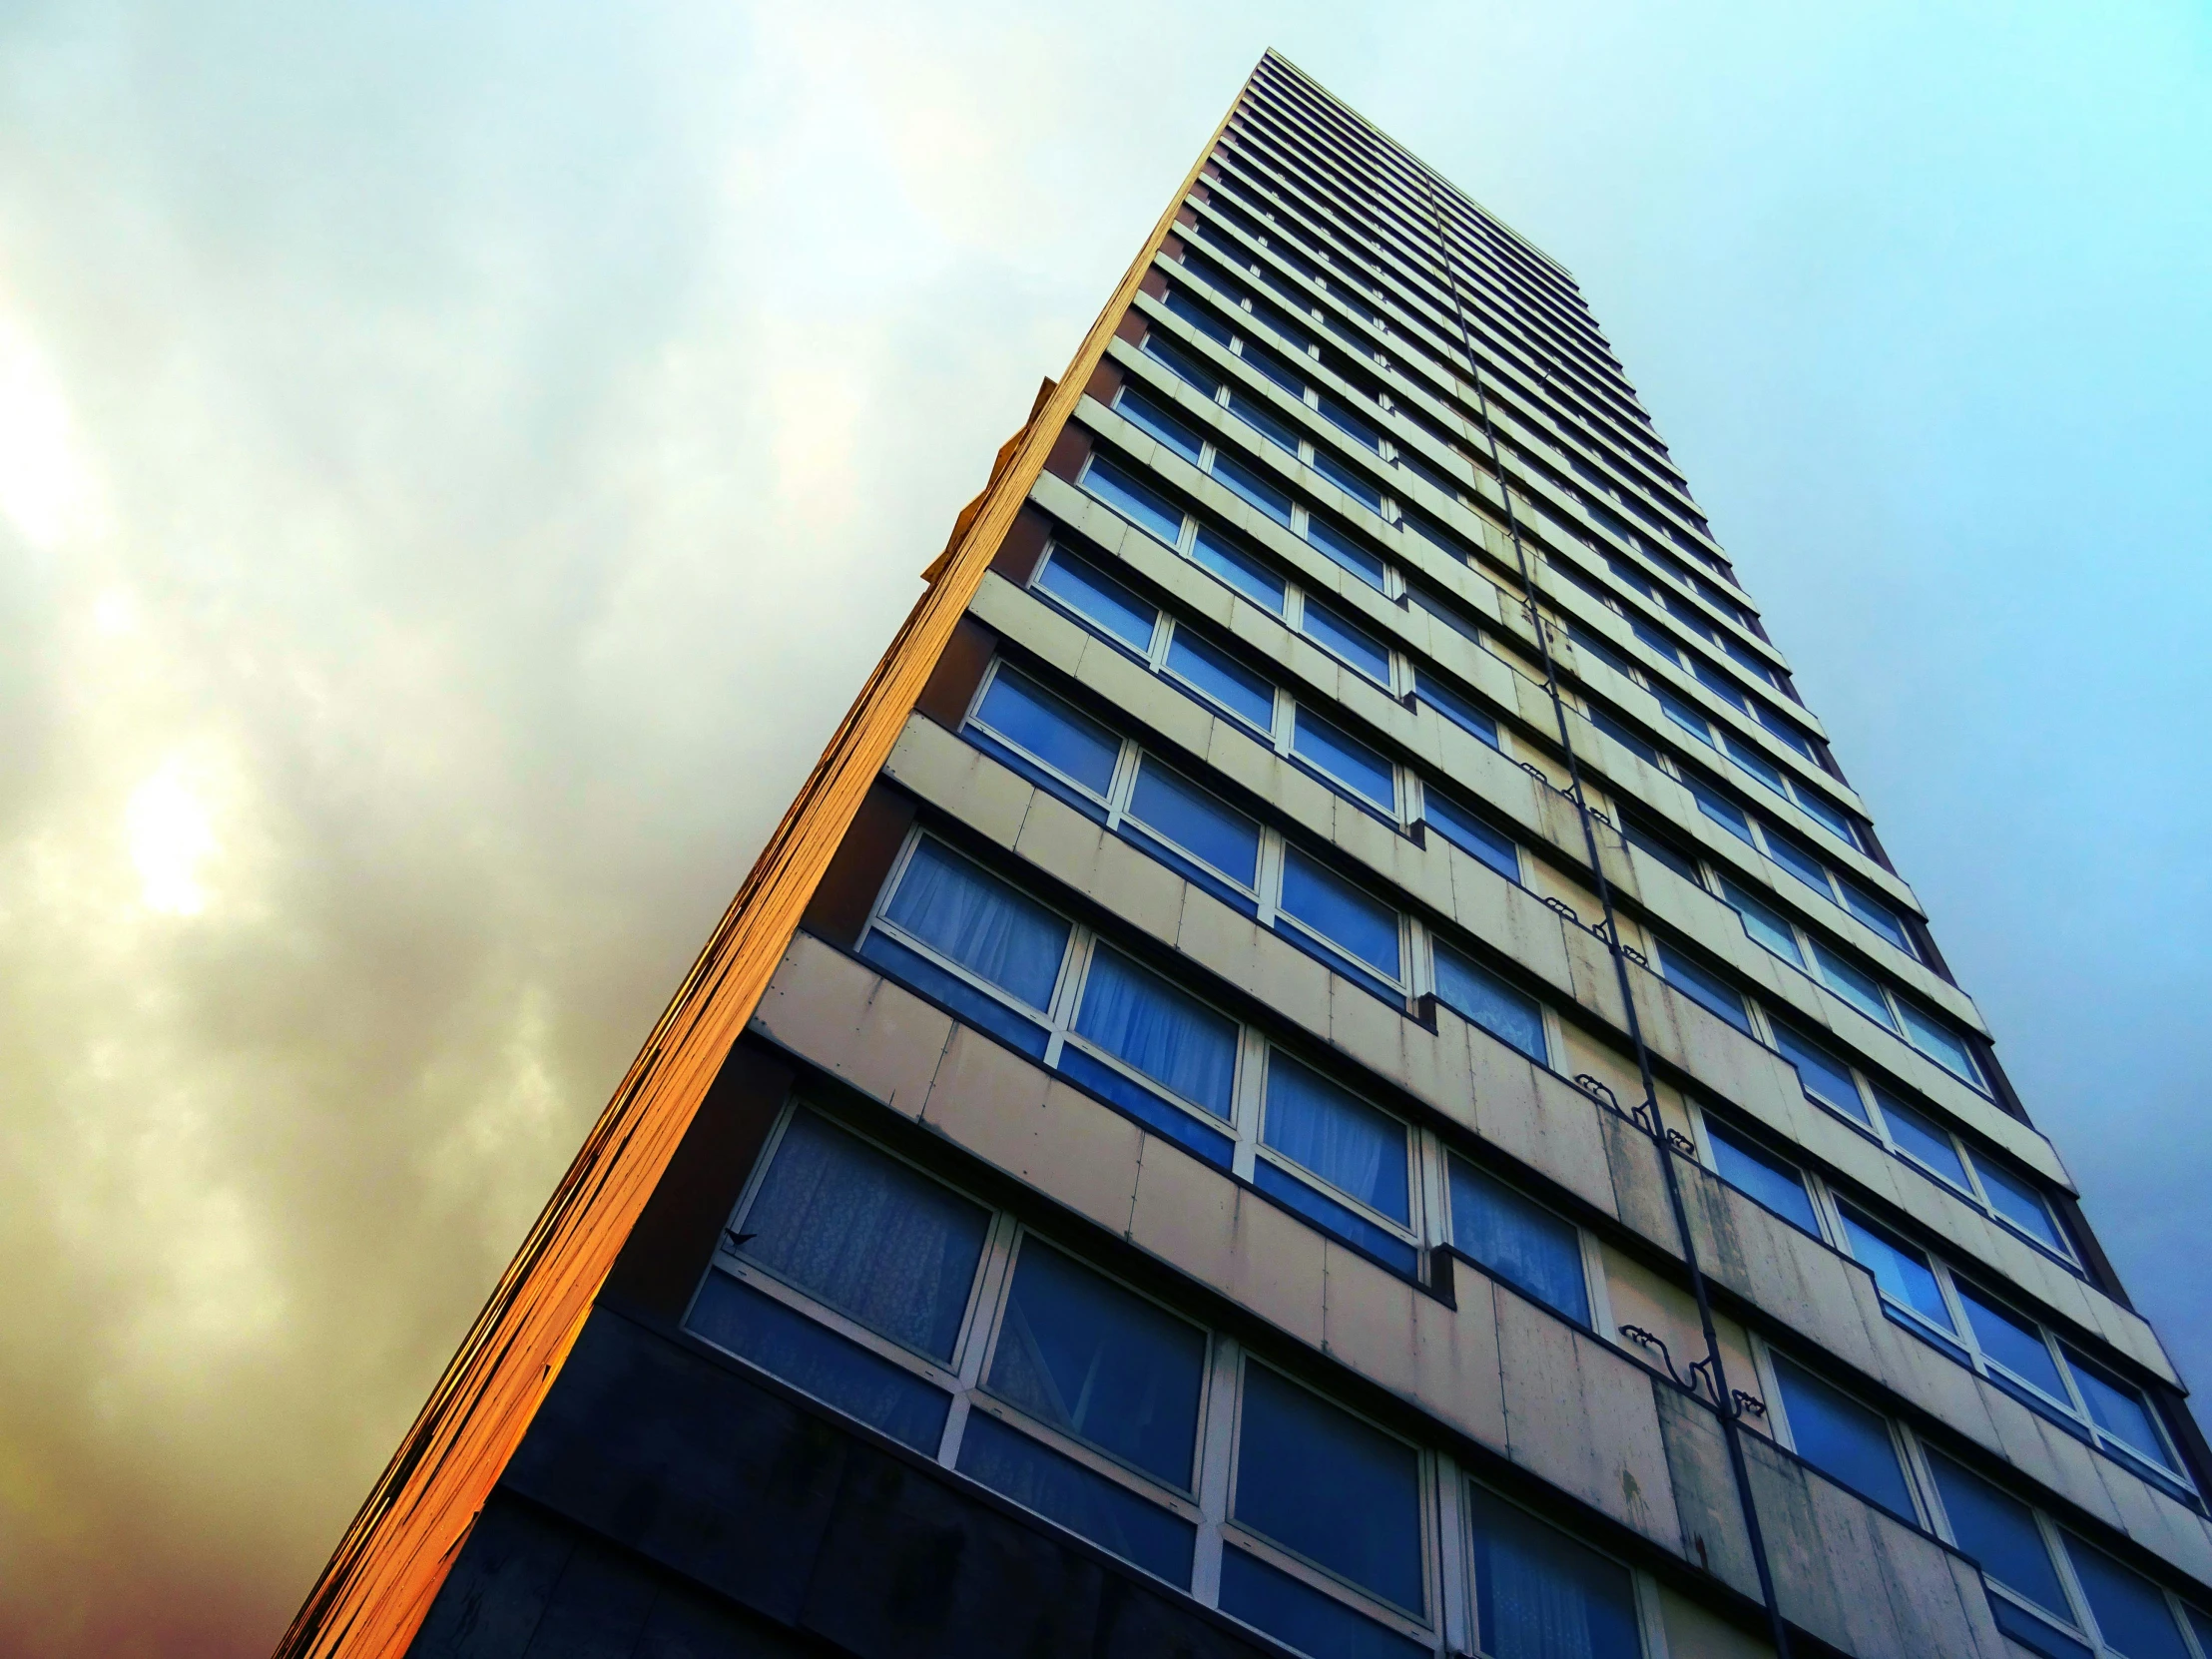 a tall building in front of a cloudy sky, an album cover, inspired by Richard Wilson, unsplash, brutalism, orange and blue sky, dramatic lighting - n 9, ten flats, view up